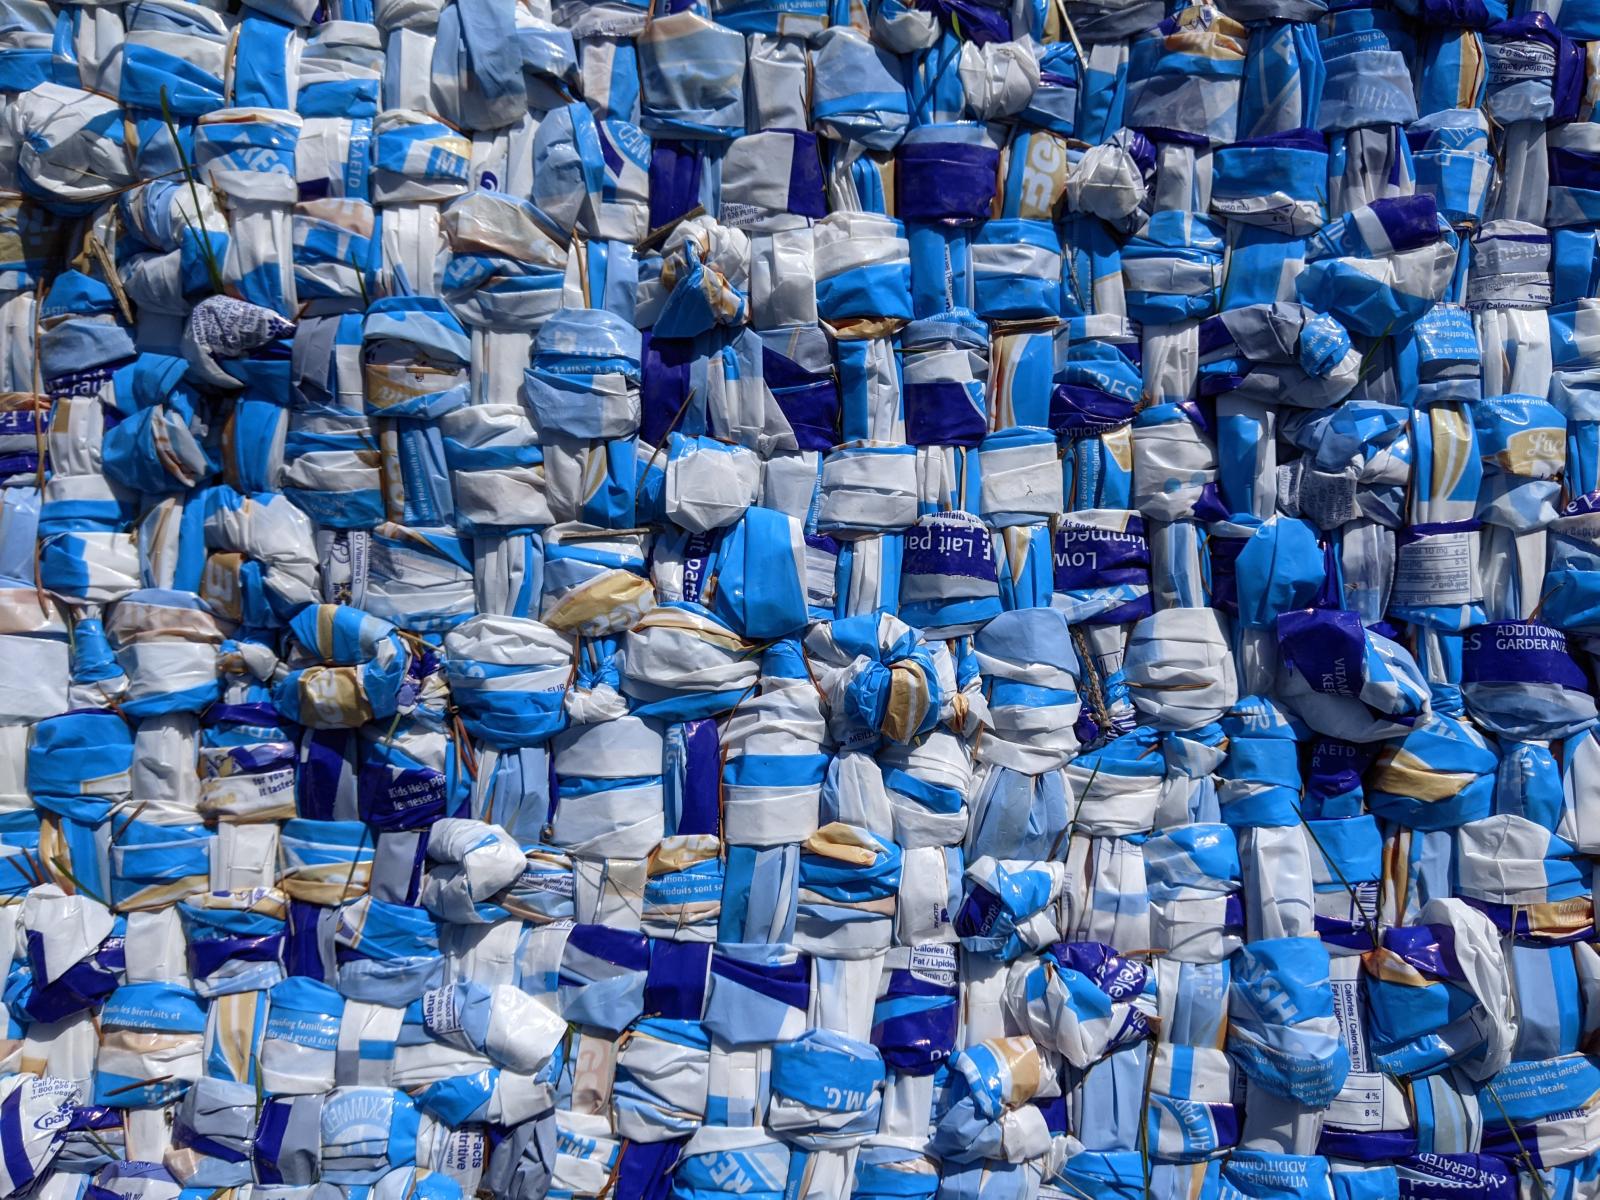 blanket woven from hundreds of milk outer bags: dark blue, light blue, white, yellow. Appears to be from Beatrice 1% 4 litre bags